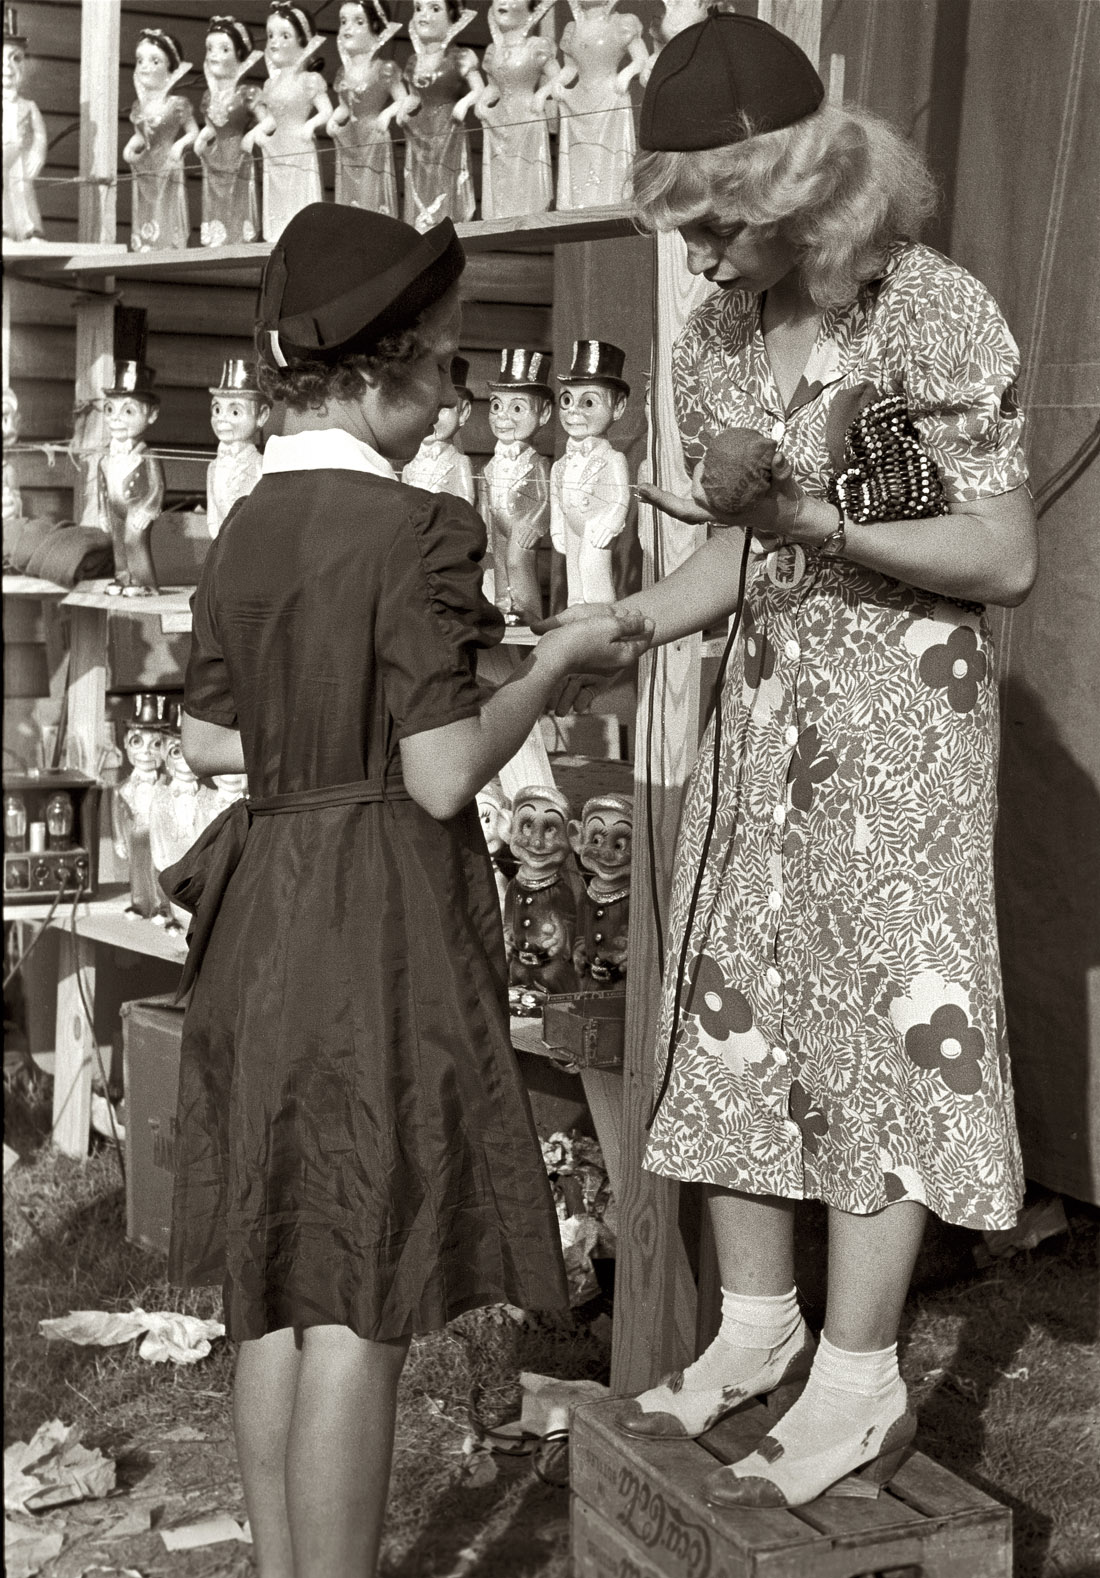 November 1938. Donaldsonville, Louisiana. "Young girl buying doll from concession manager at the state fair." View full size. 35mm nitrate negative by Russell Lee for the Farm Security Administration. Library of Congress.